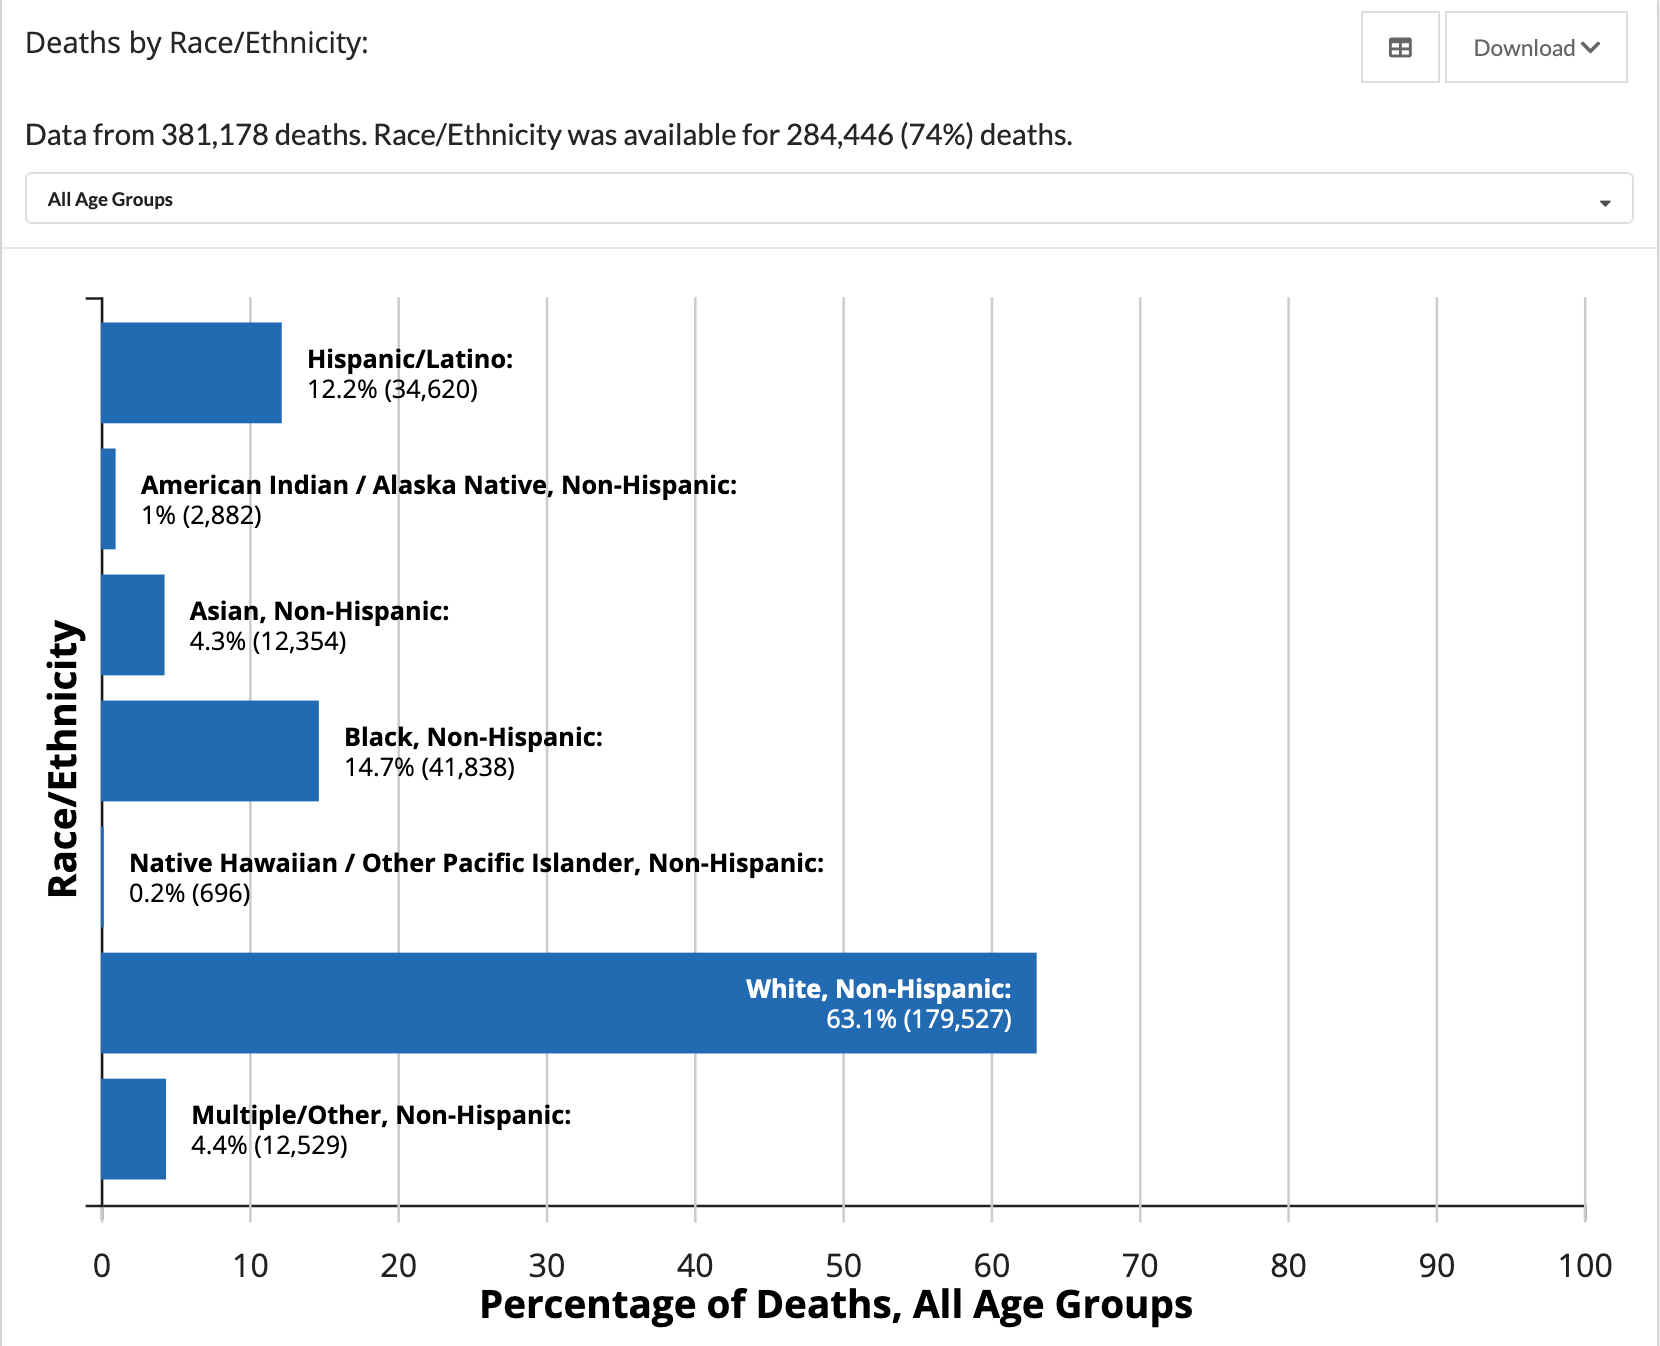 Bar graph showing the percentage of COVID-19 deaths by race/ethnicity for 74% of known deaths. White, non-Hispanic people are 63.1% of deaths, Hispanic/Latino people are 12.2% of deaths, Black, non-Hispanic people are 14.7% of deaths, Asian, non-Hispanic people are 4.3% of deaths, American Indian / Alaska Native people are 1% of deaths, Native Hawaiian people are are .2% of deaths, and multiple/other non-Hispanic people are 4.4% of deaths.